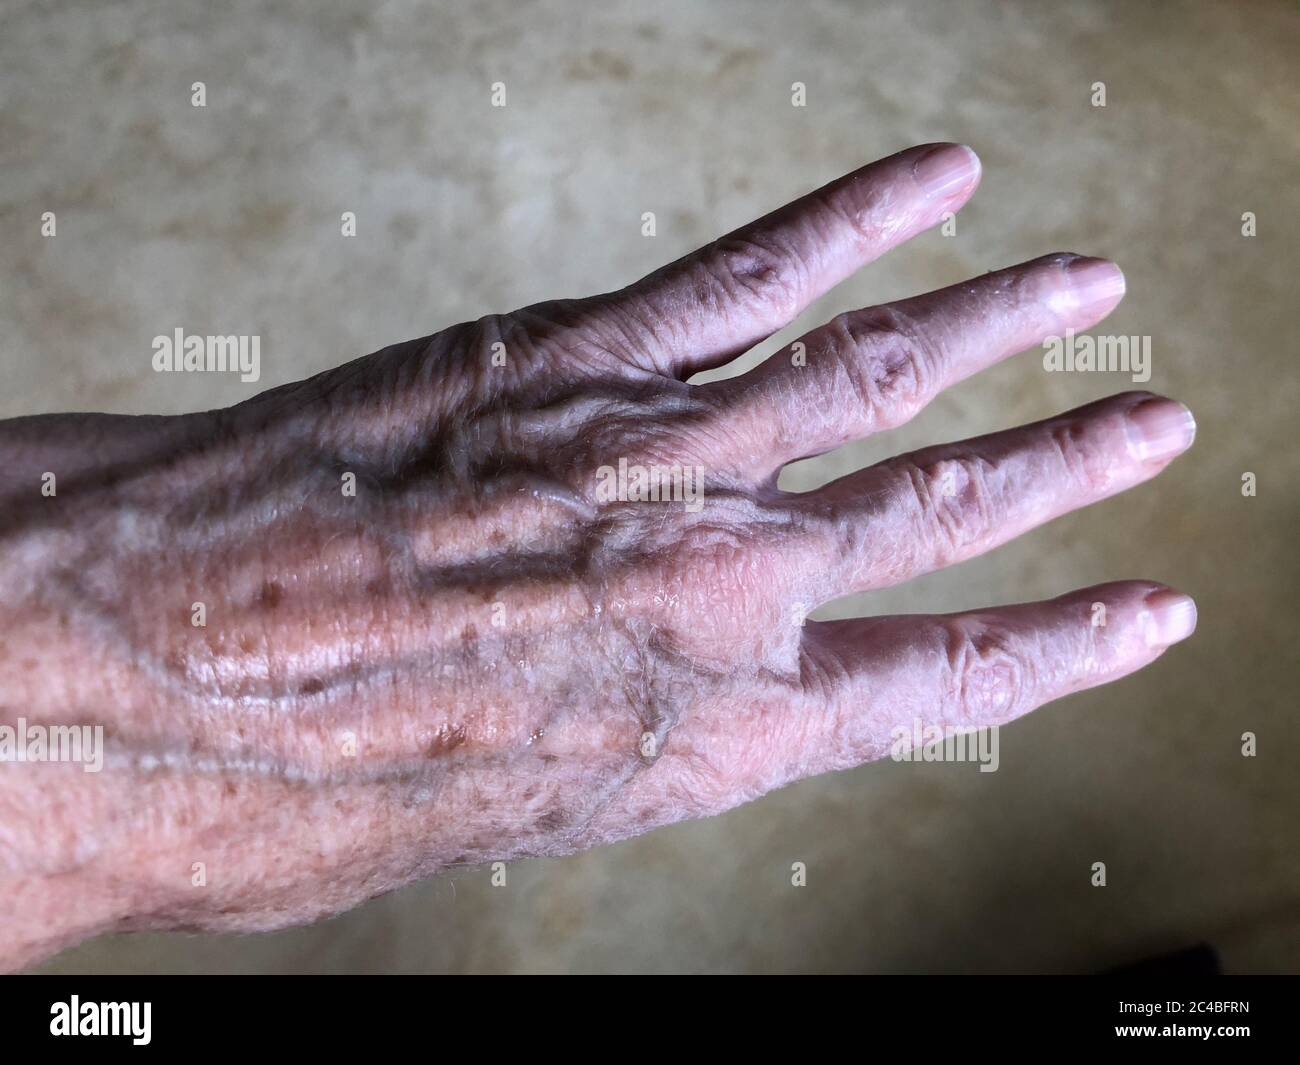 Age spots on the hand of a 72-year-old woman. Stock Photo